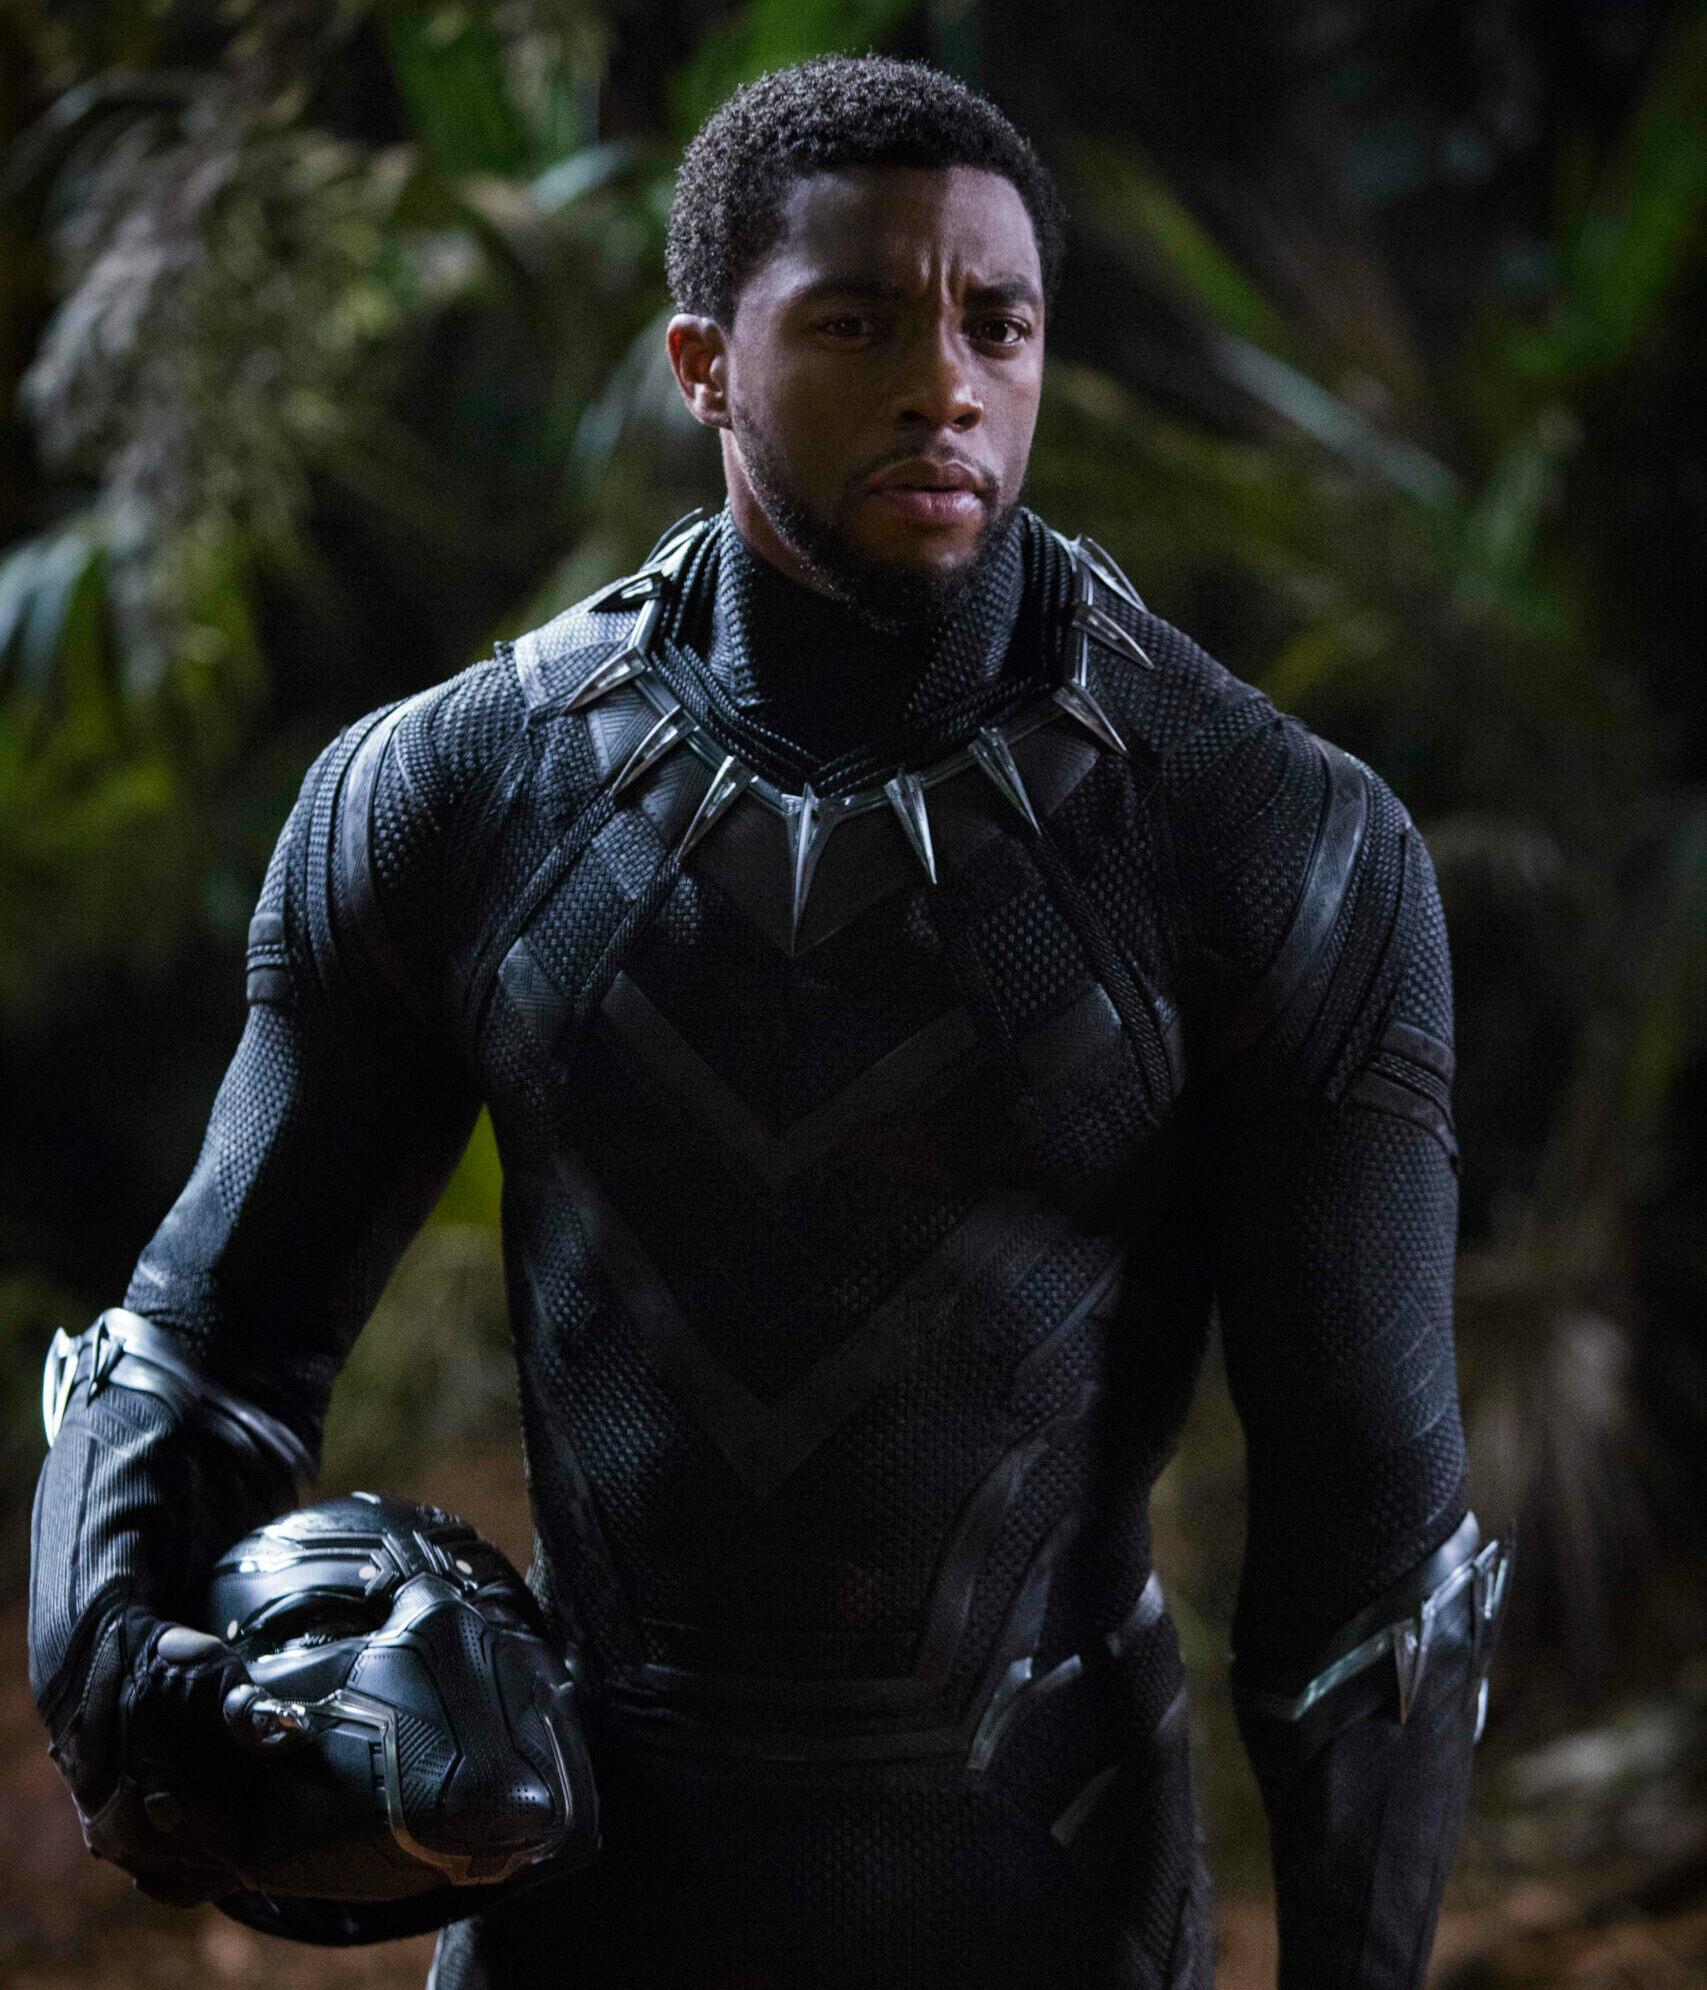 16, 2018 TITLE: STUDIO: Marvel Studios DIRECTOR: Ryan Coogler PLOT: T'Challa, after the death of his father, the King of Wakanda, returns home to the isolated, technologically advanced African nation to succeed to the throne and take his rightful place as king. STARRING: null. 15 Feb 2018 Pictured: RELEASE DATE: February 16, 2018 TITLE: STUDIO: Marvel Studios DIRECTOR: Ryan Coogler PLOT: T'Challa, after the death of his father, the King of Wakanda, returns home to the isolated, technologically advanced African nation to succeed to the throne and take his rightful place as king. STARRING: Marvel Studios' BLACK PANTHER..